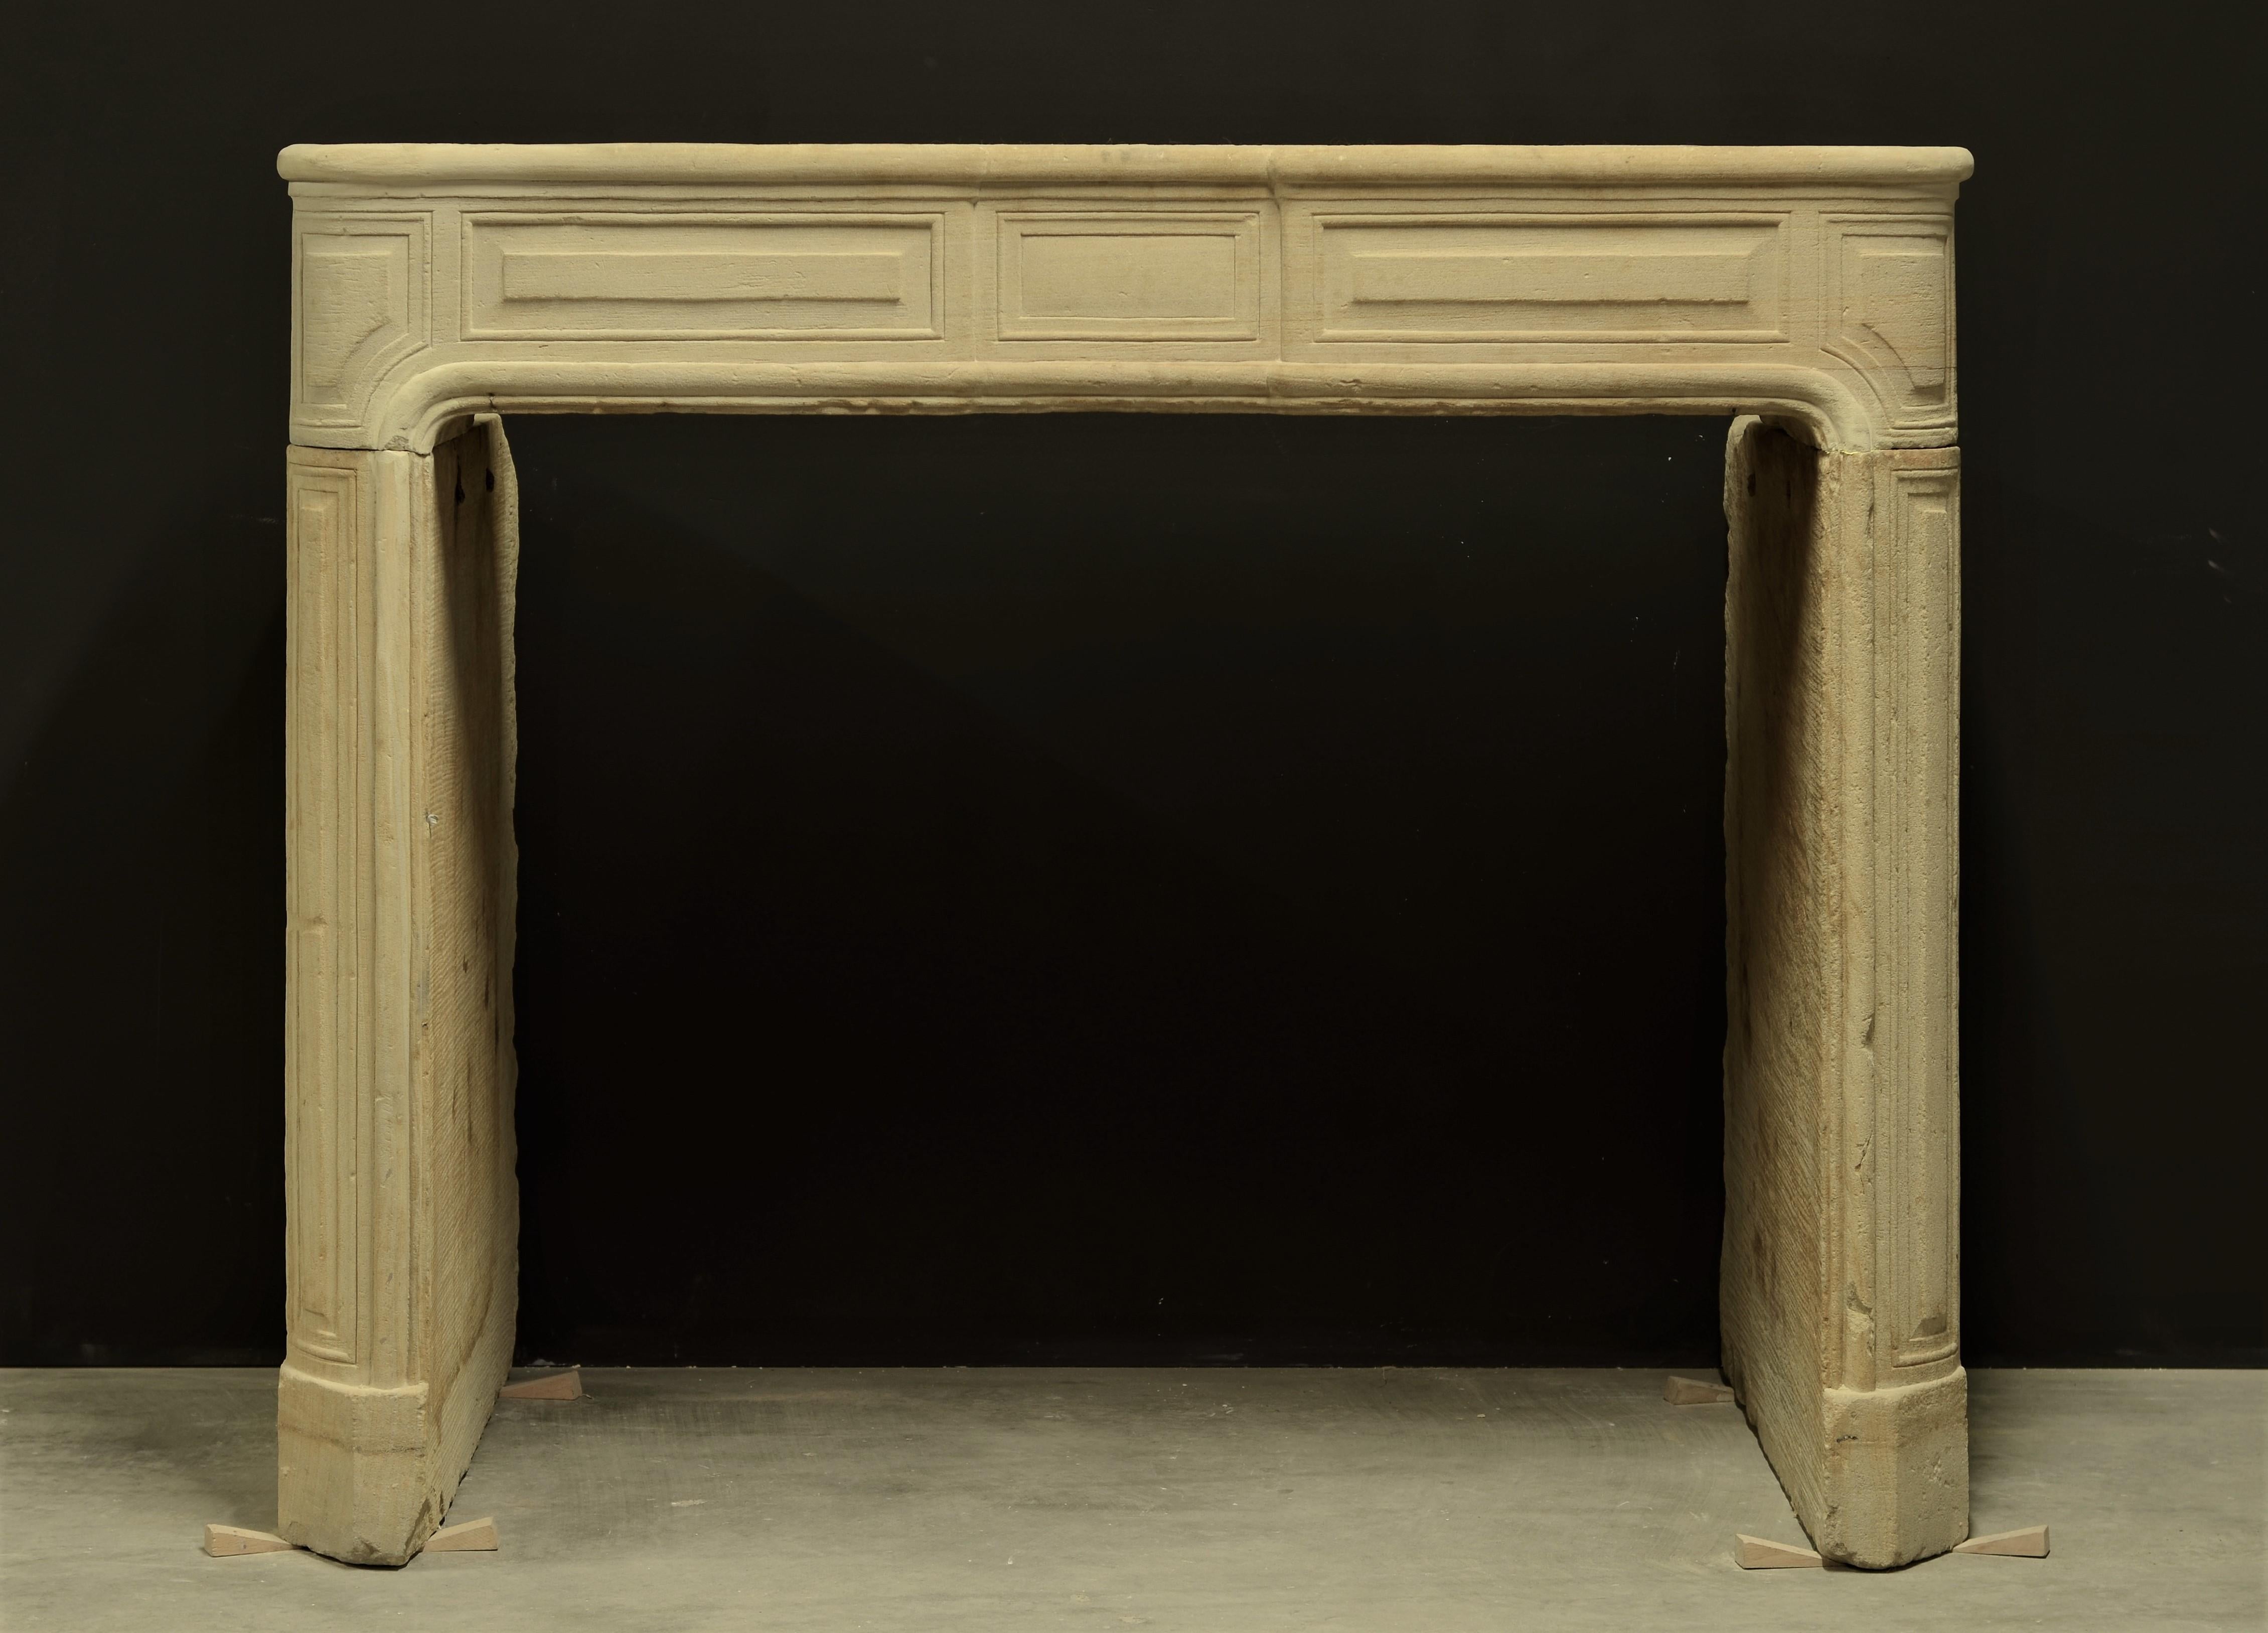 Antique Sandstone Louis XVI Fireplace Mantel

A nice soft toned French Louis XVI Fireplace mantel in a Fine quality sandstone.
The paneled frieze is supported by rounded jambs also with panels.

Overal in a nice original condition with some minor